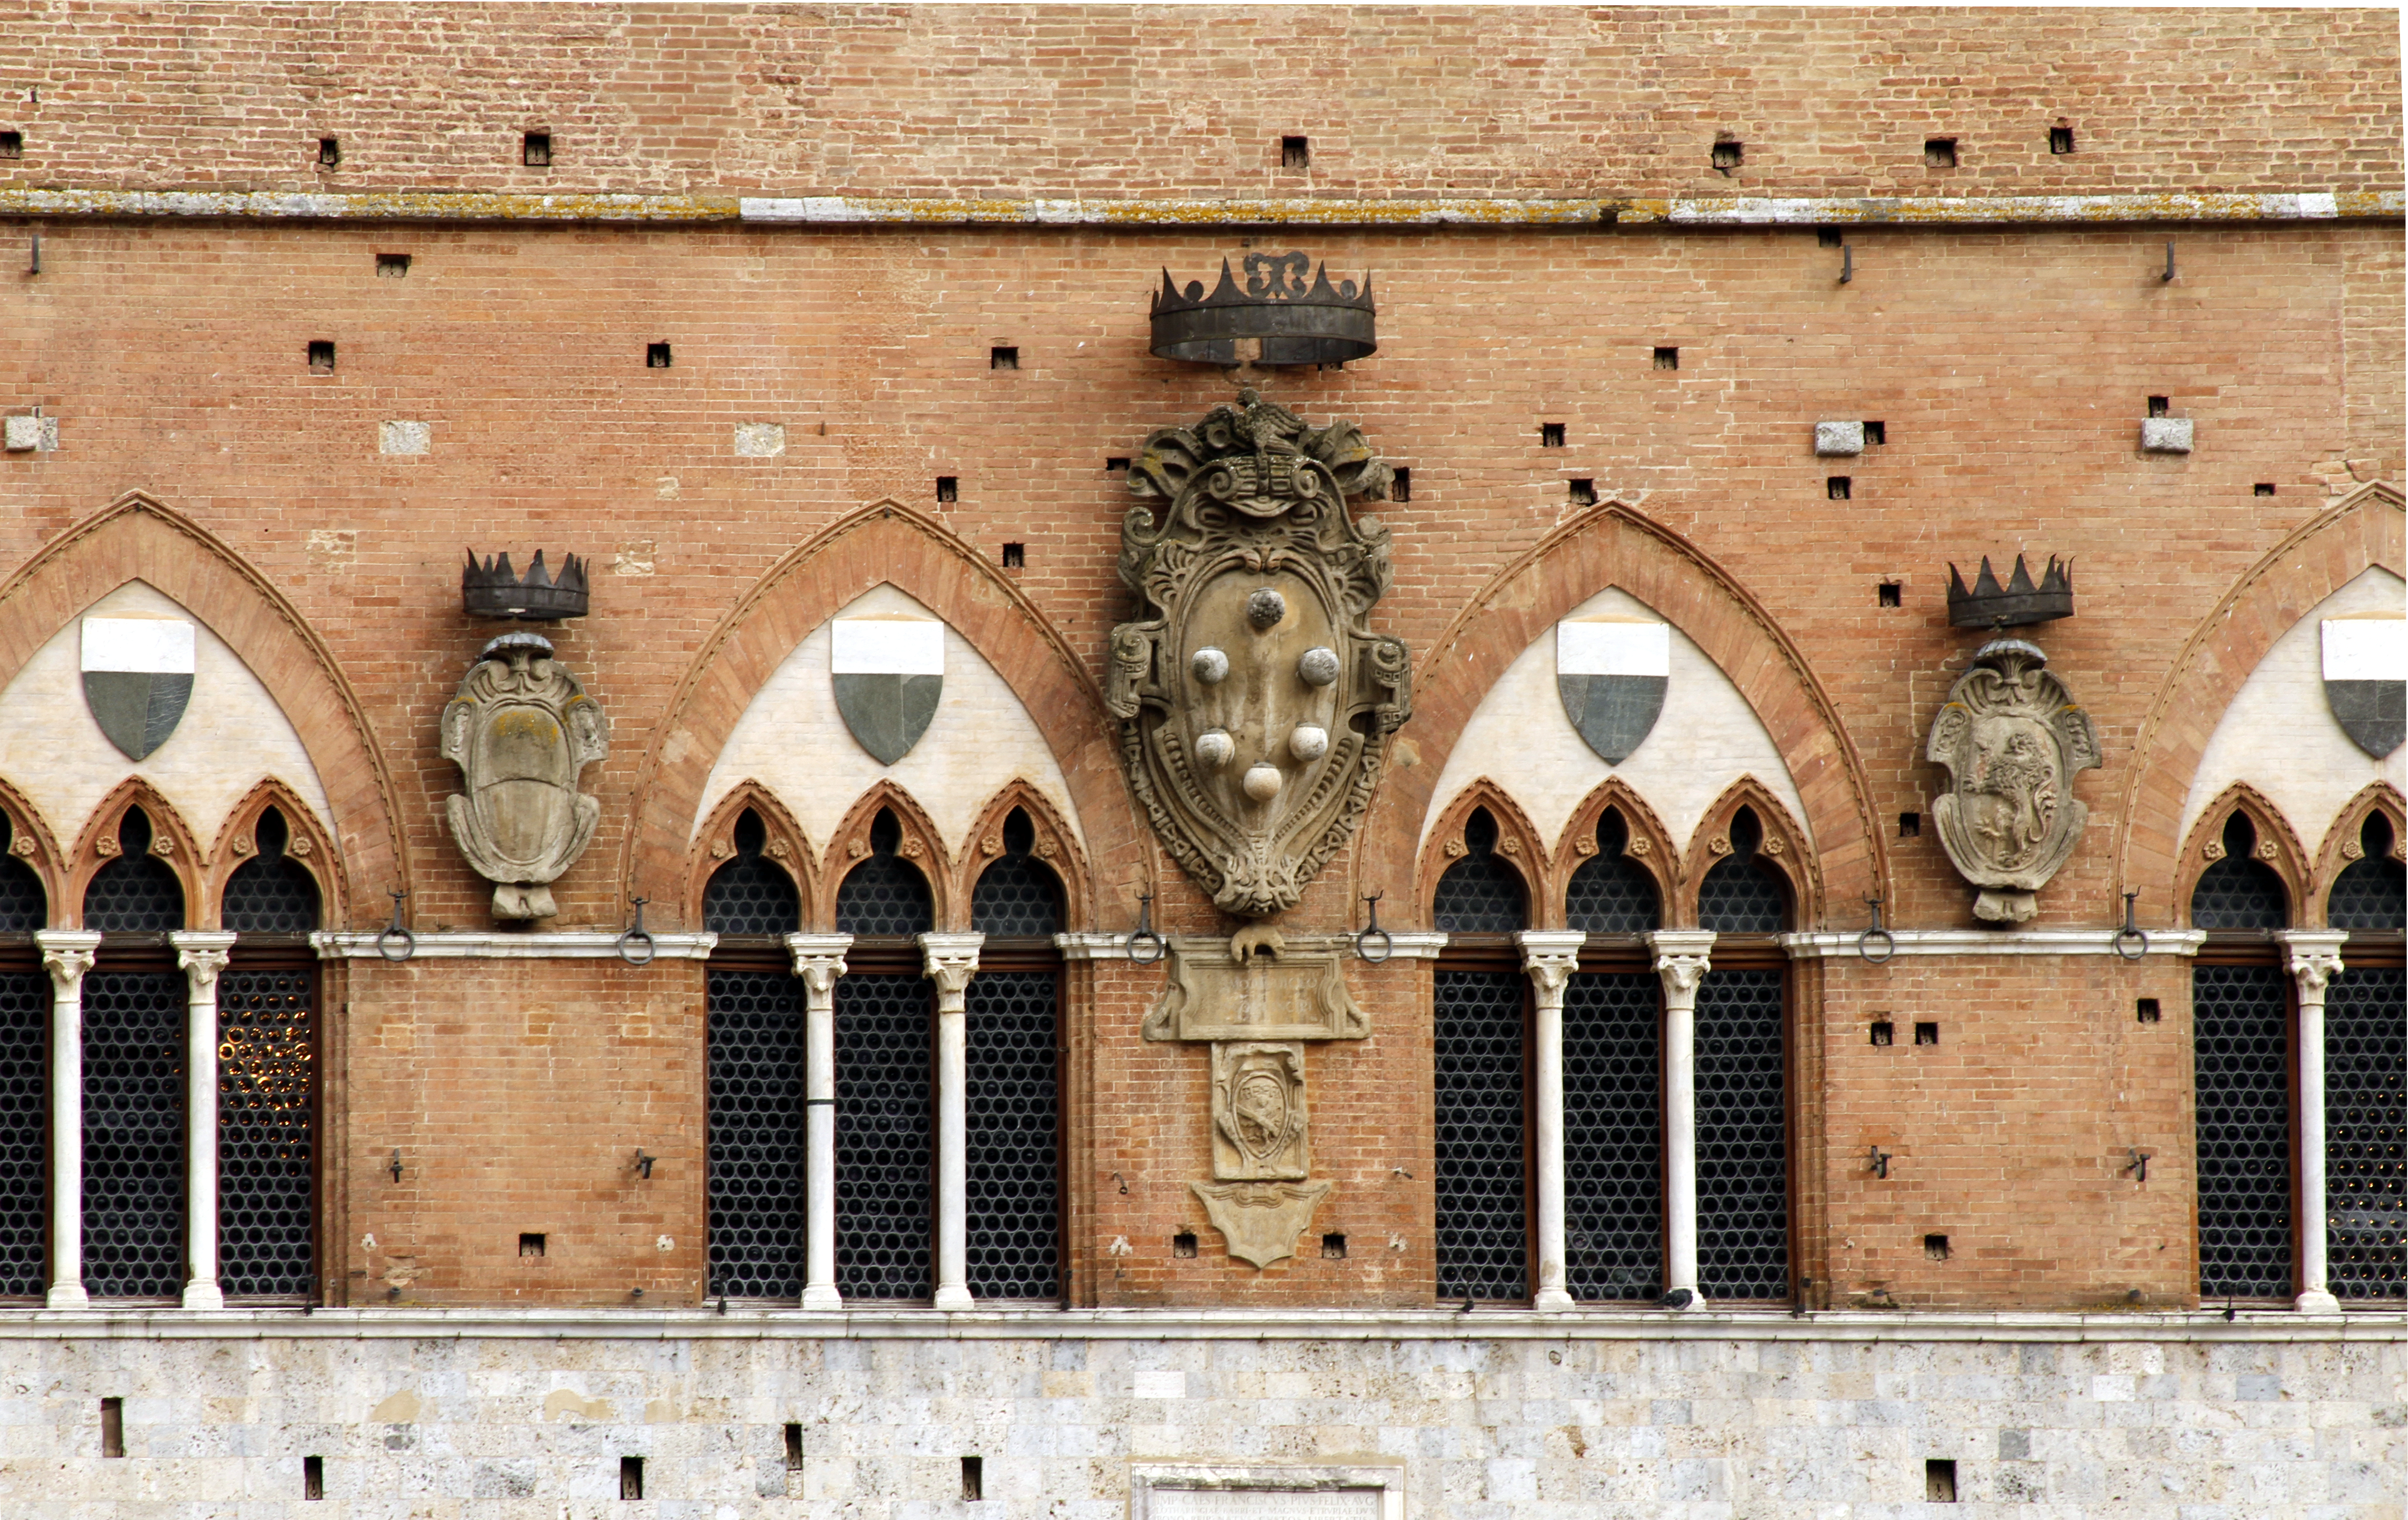 Coat of arms of House of Medici - Palazzo Publico - Siena 2016.jpg